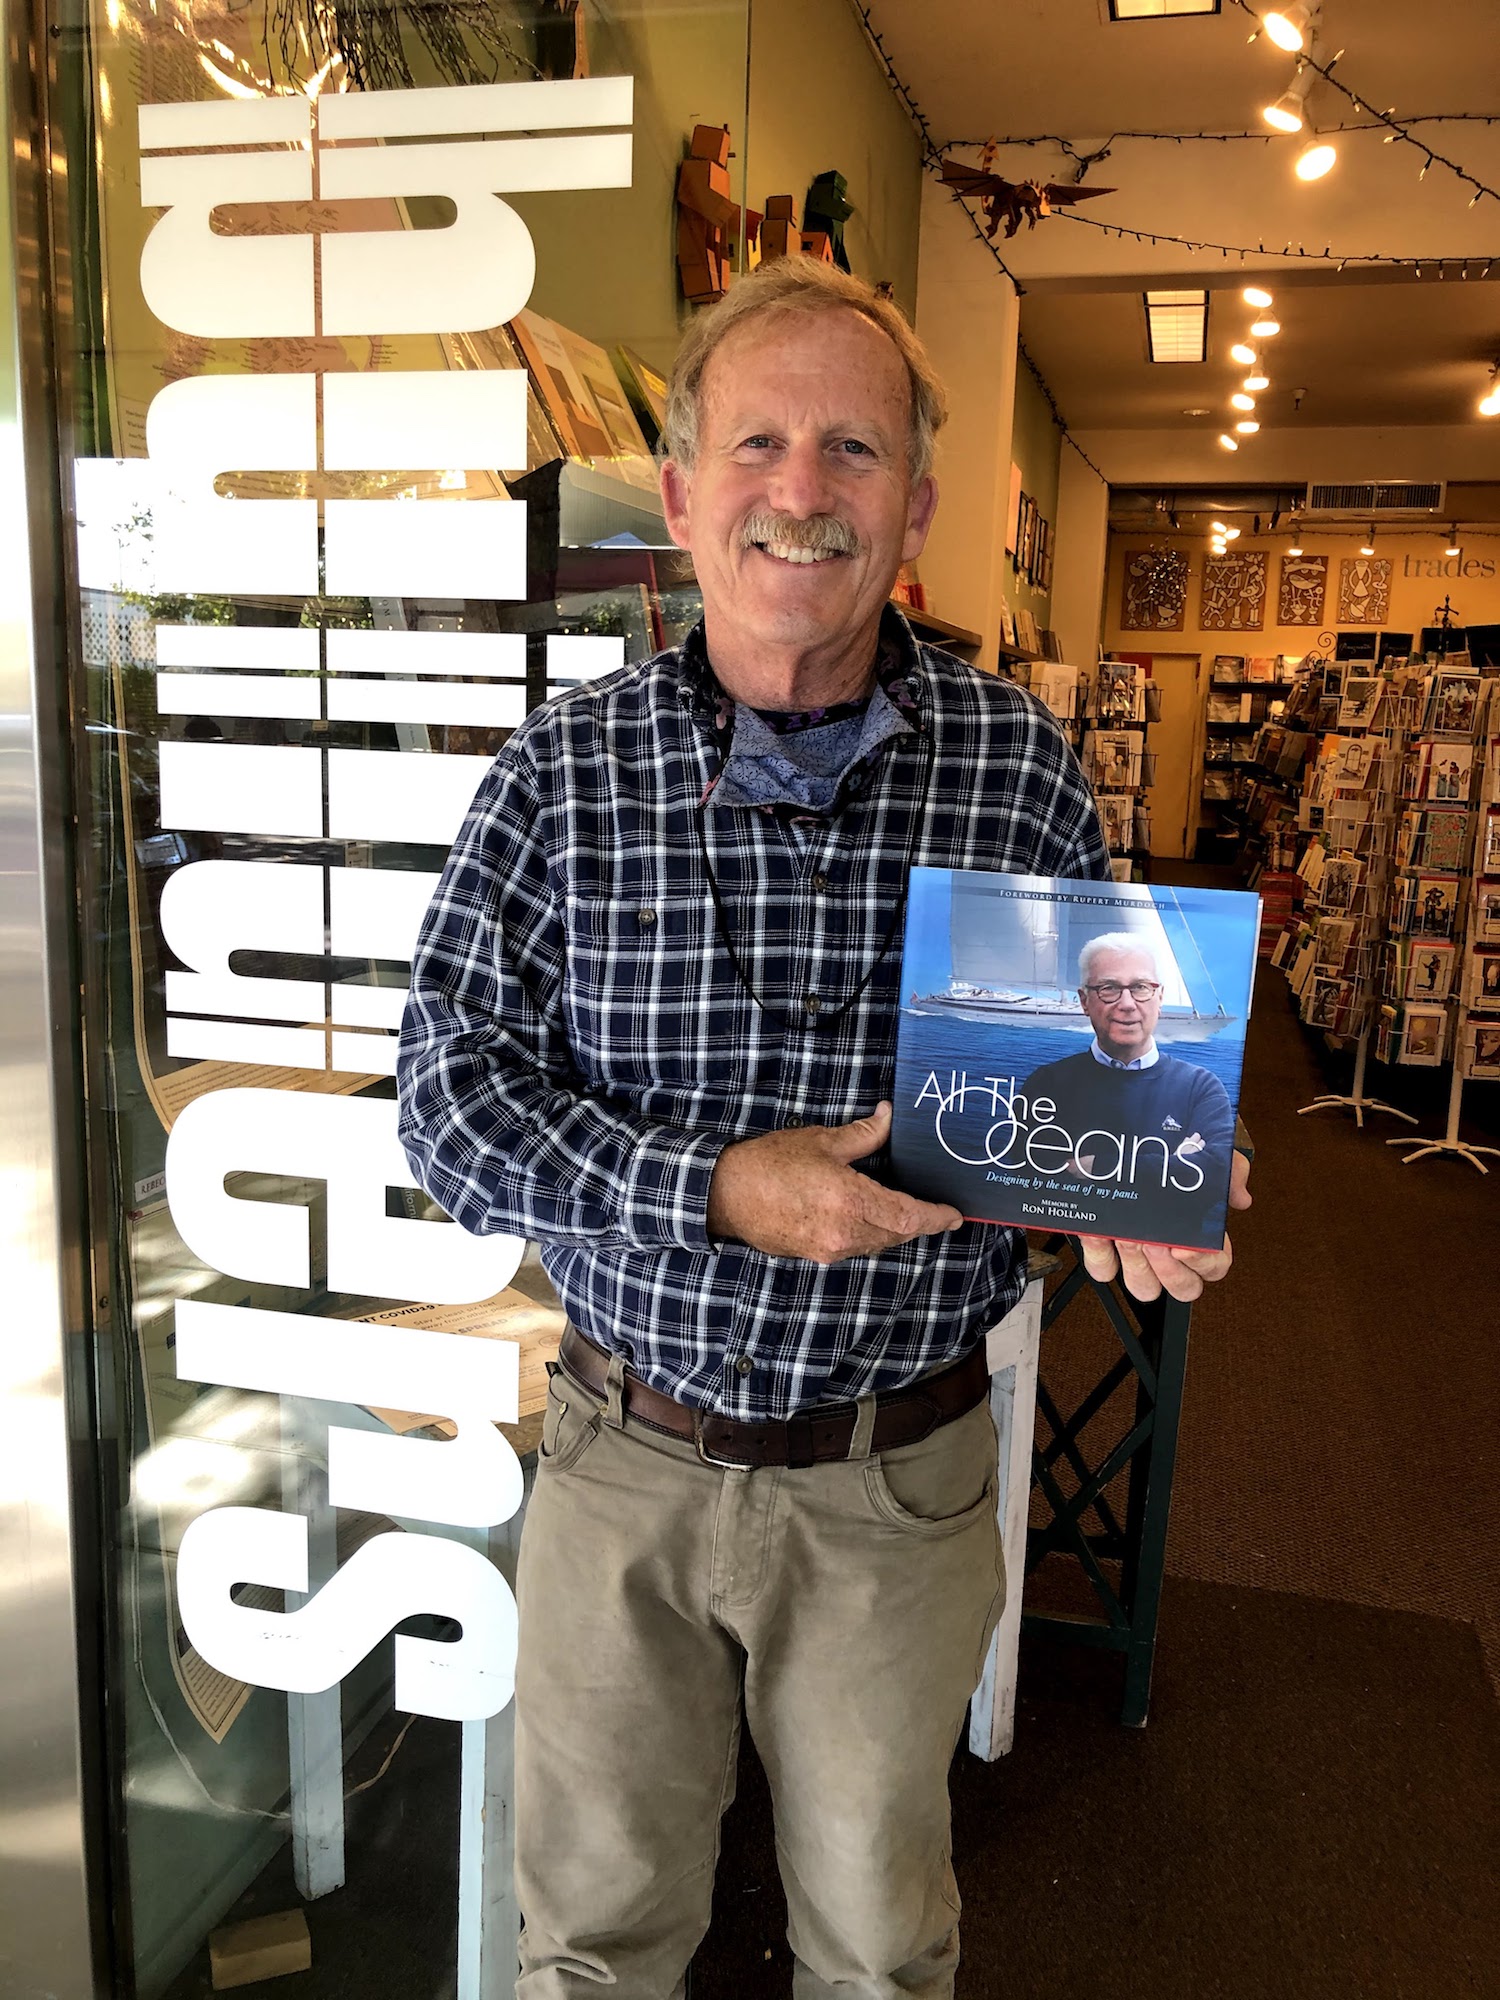 George Kiskaddon with a copy of Ron Holland's All The Oceans at his Builders Booksource shop in Berkley CA